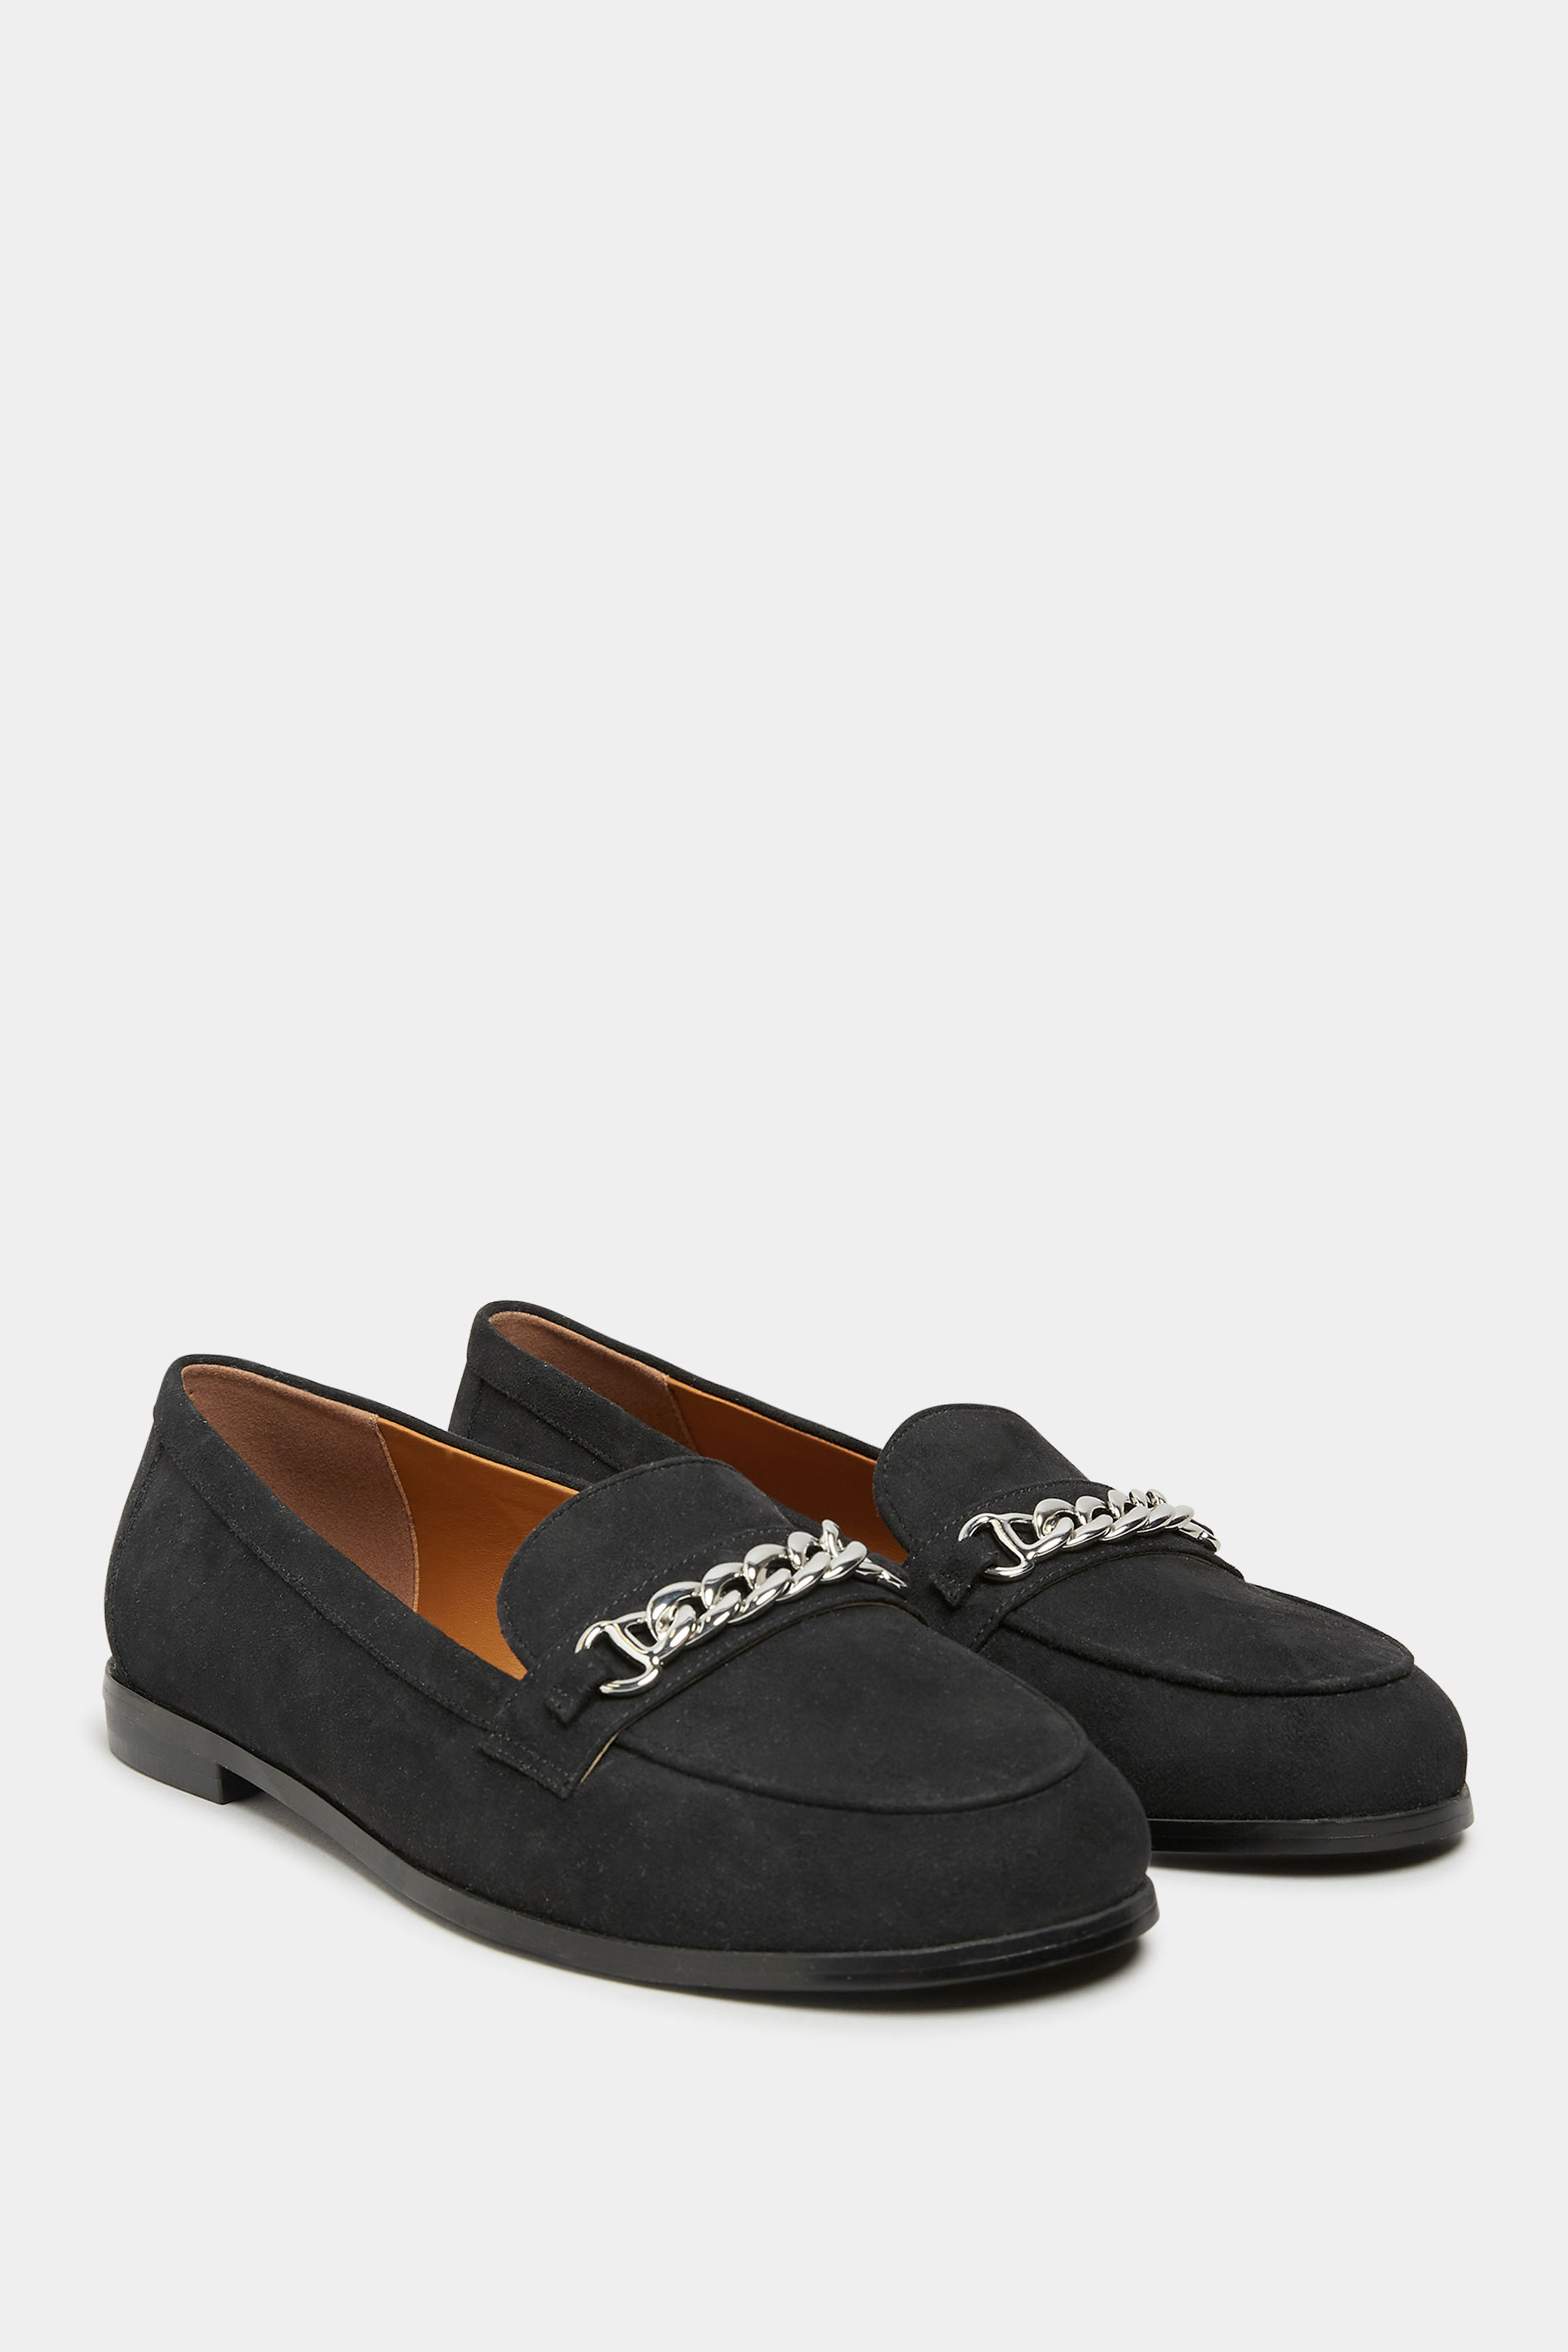 LTS Black Chain Loafers In Standard Fit | Long Tall Sally 2